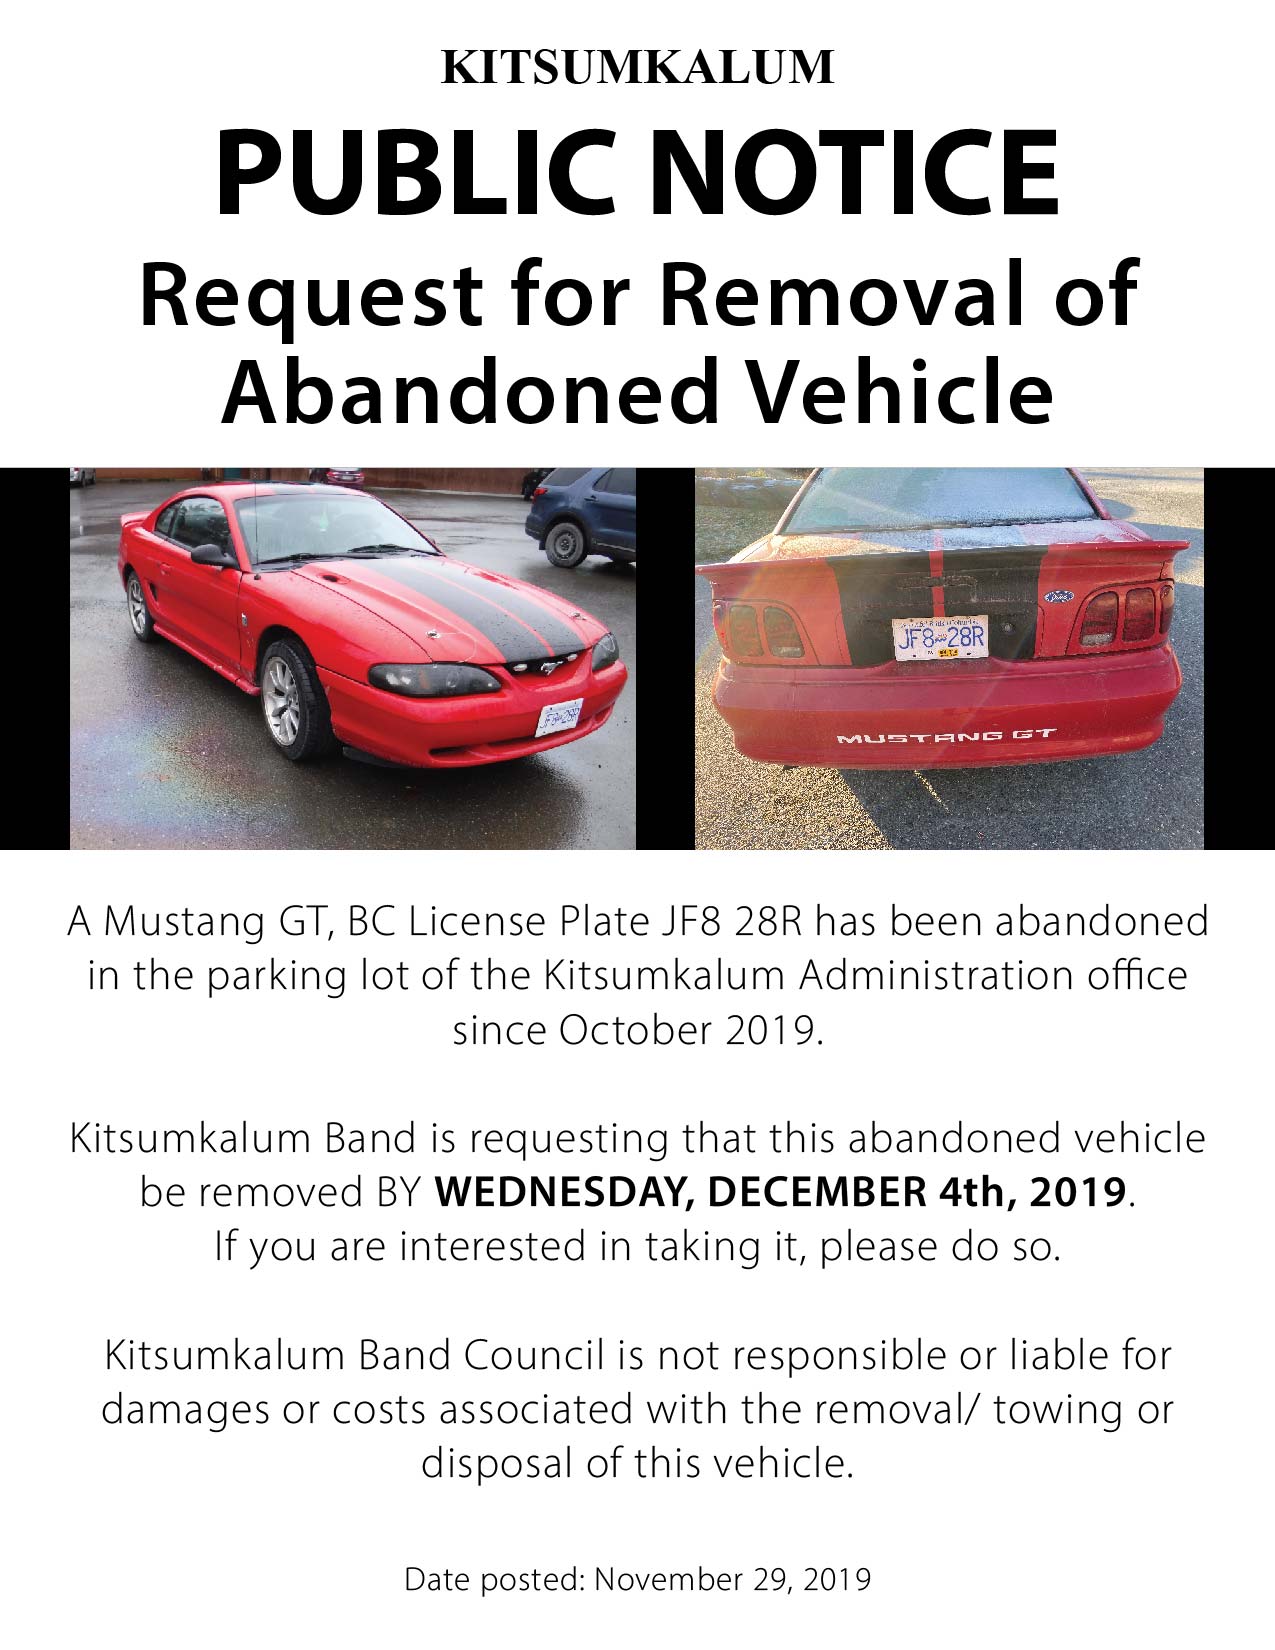 Request for Removal of Abandoned Vehicle